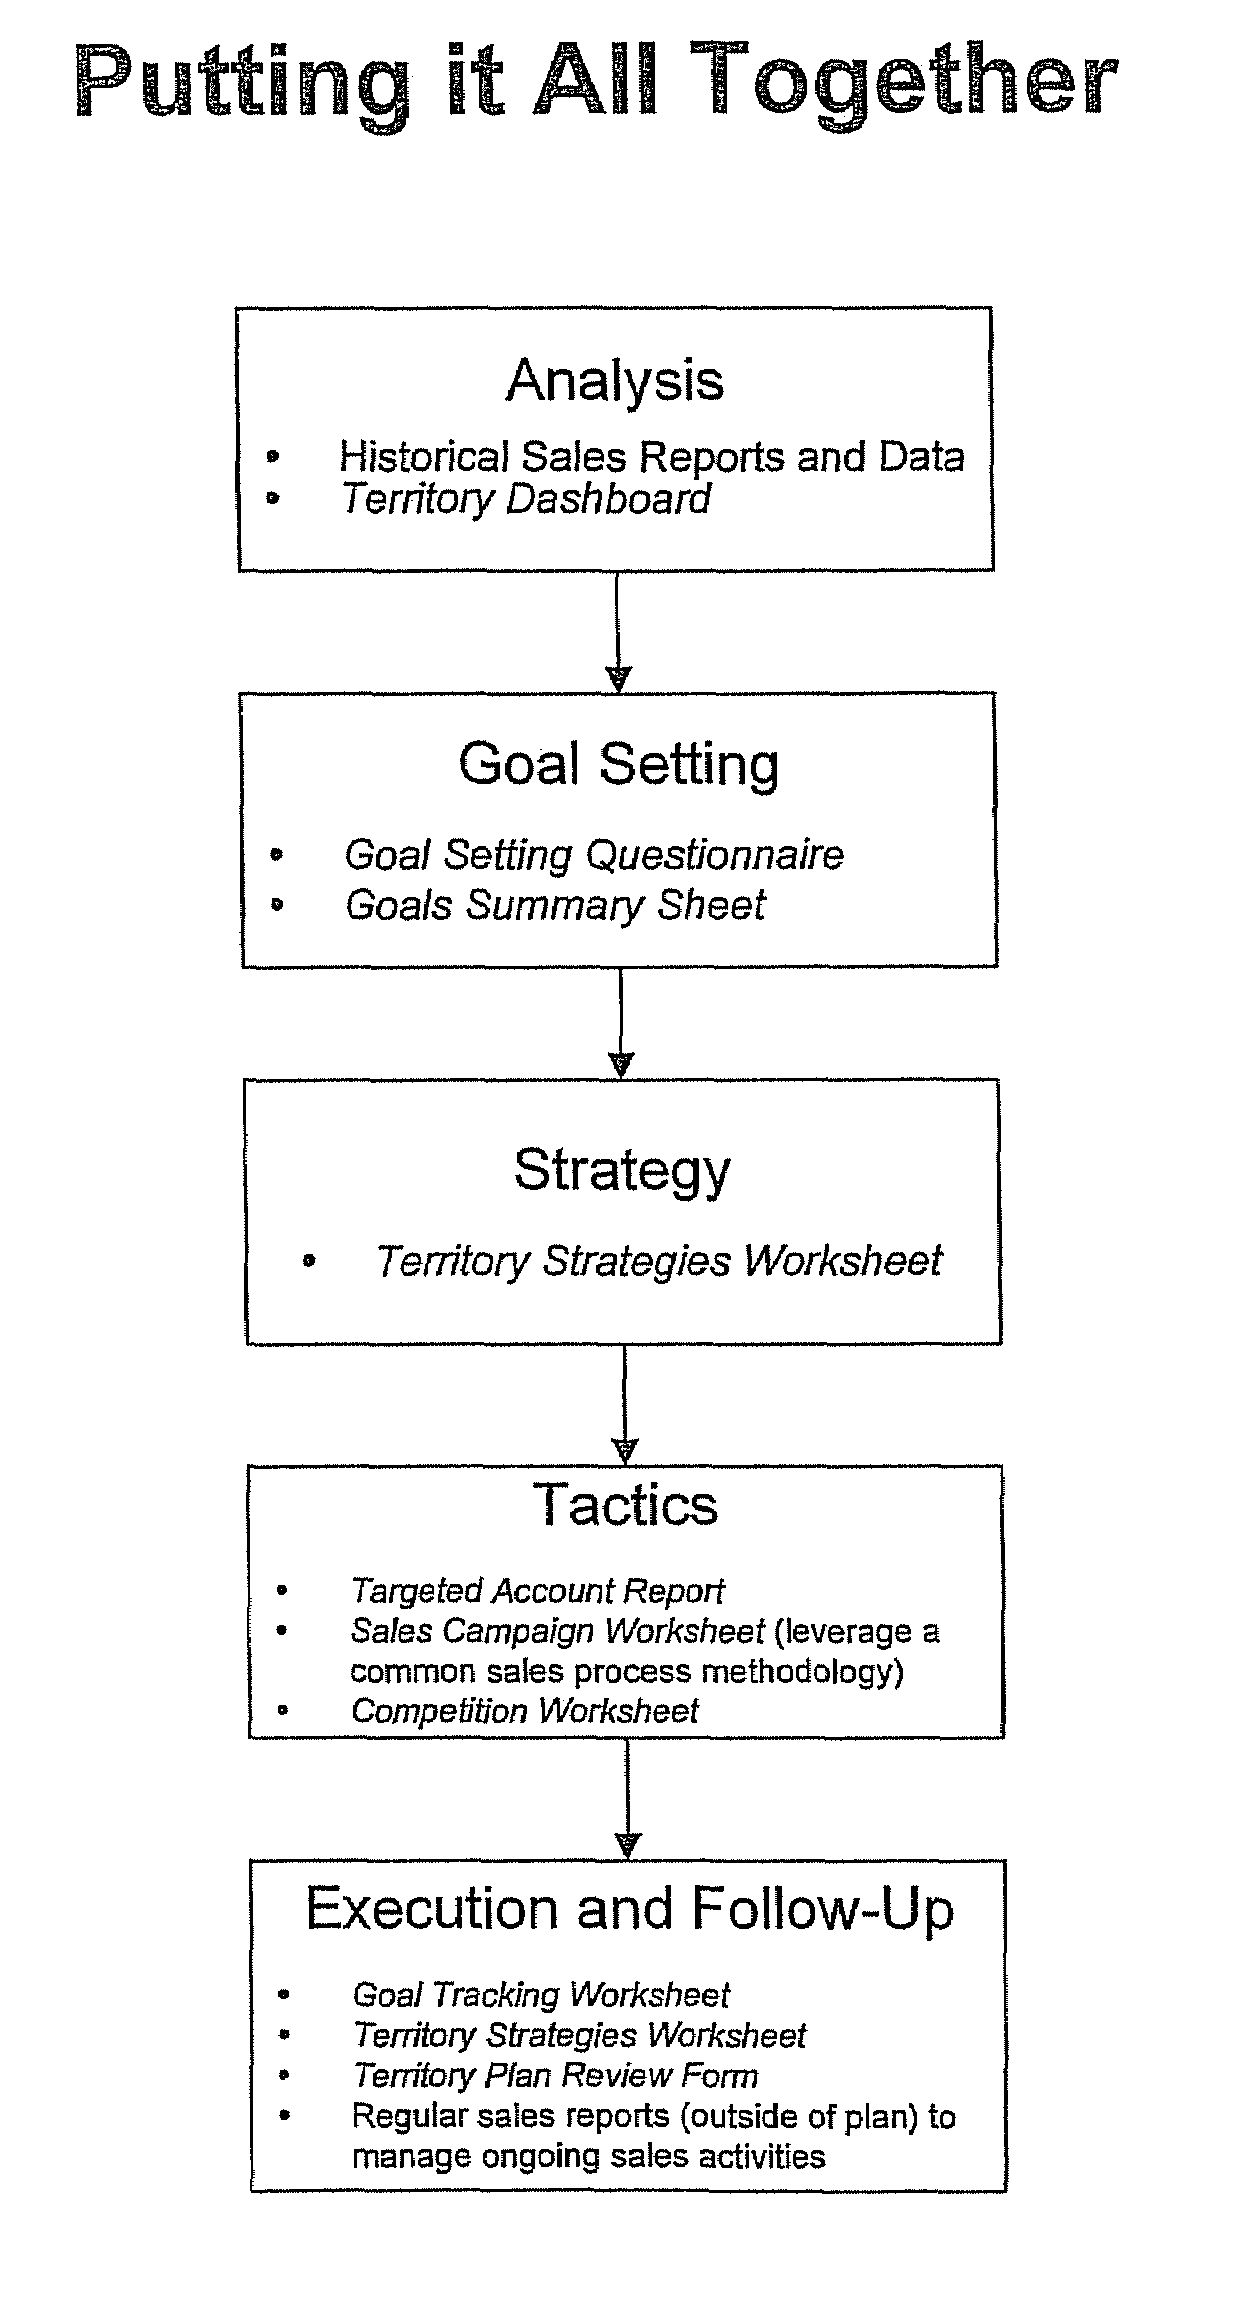 Sales territory planning tool and method